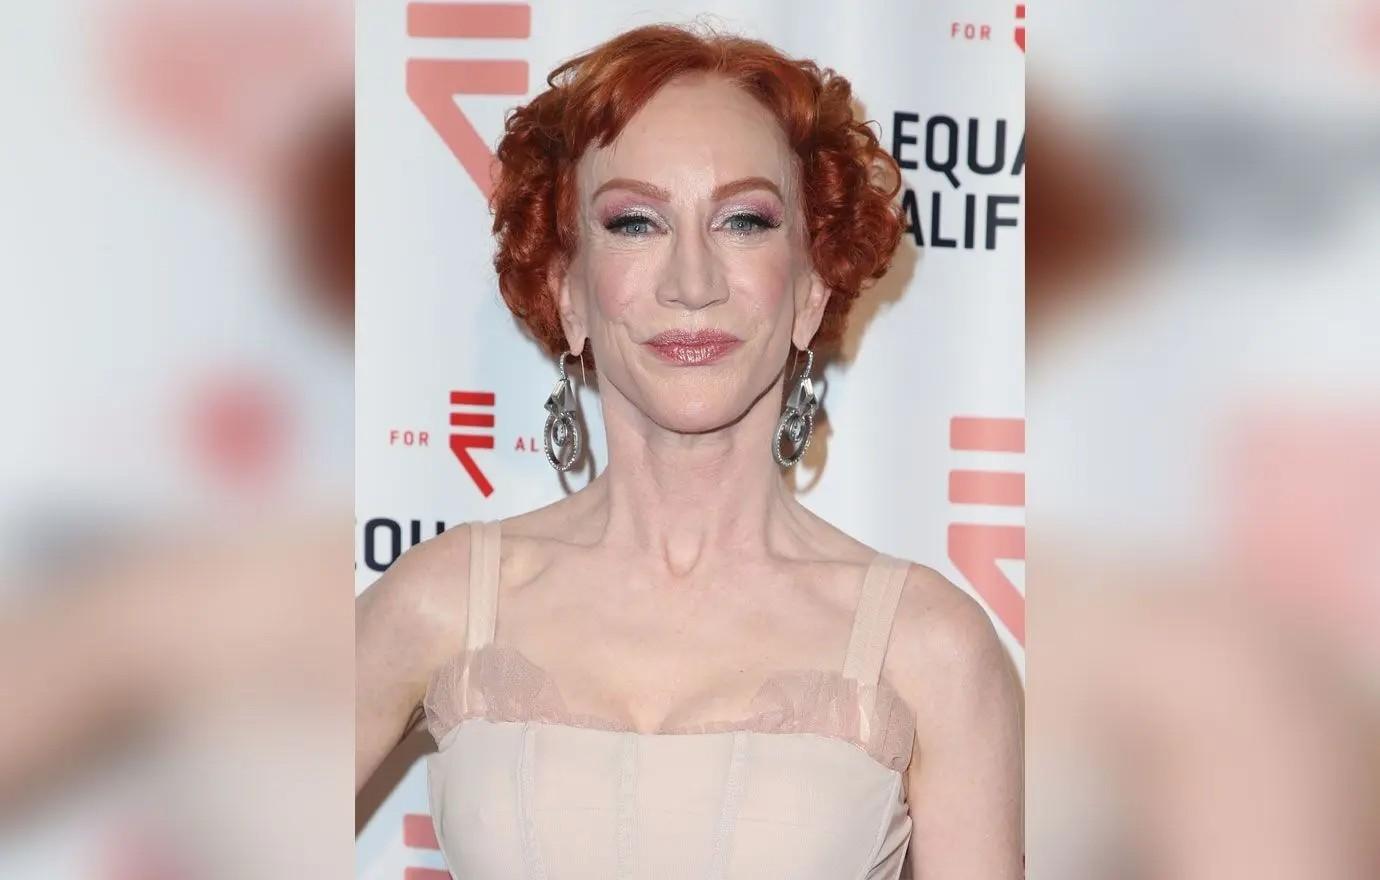 andrew van eck recommends Kathy Griffin Sex Tape